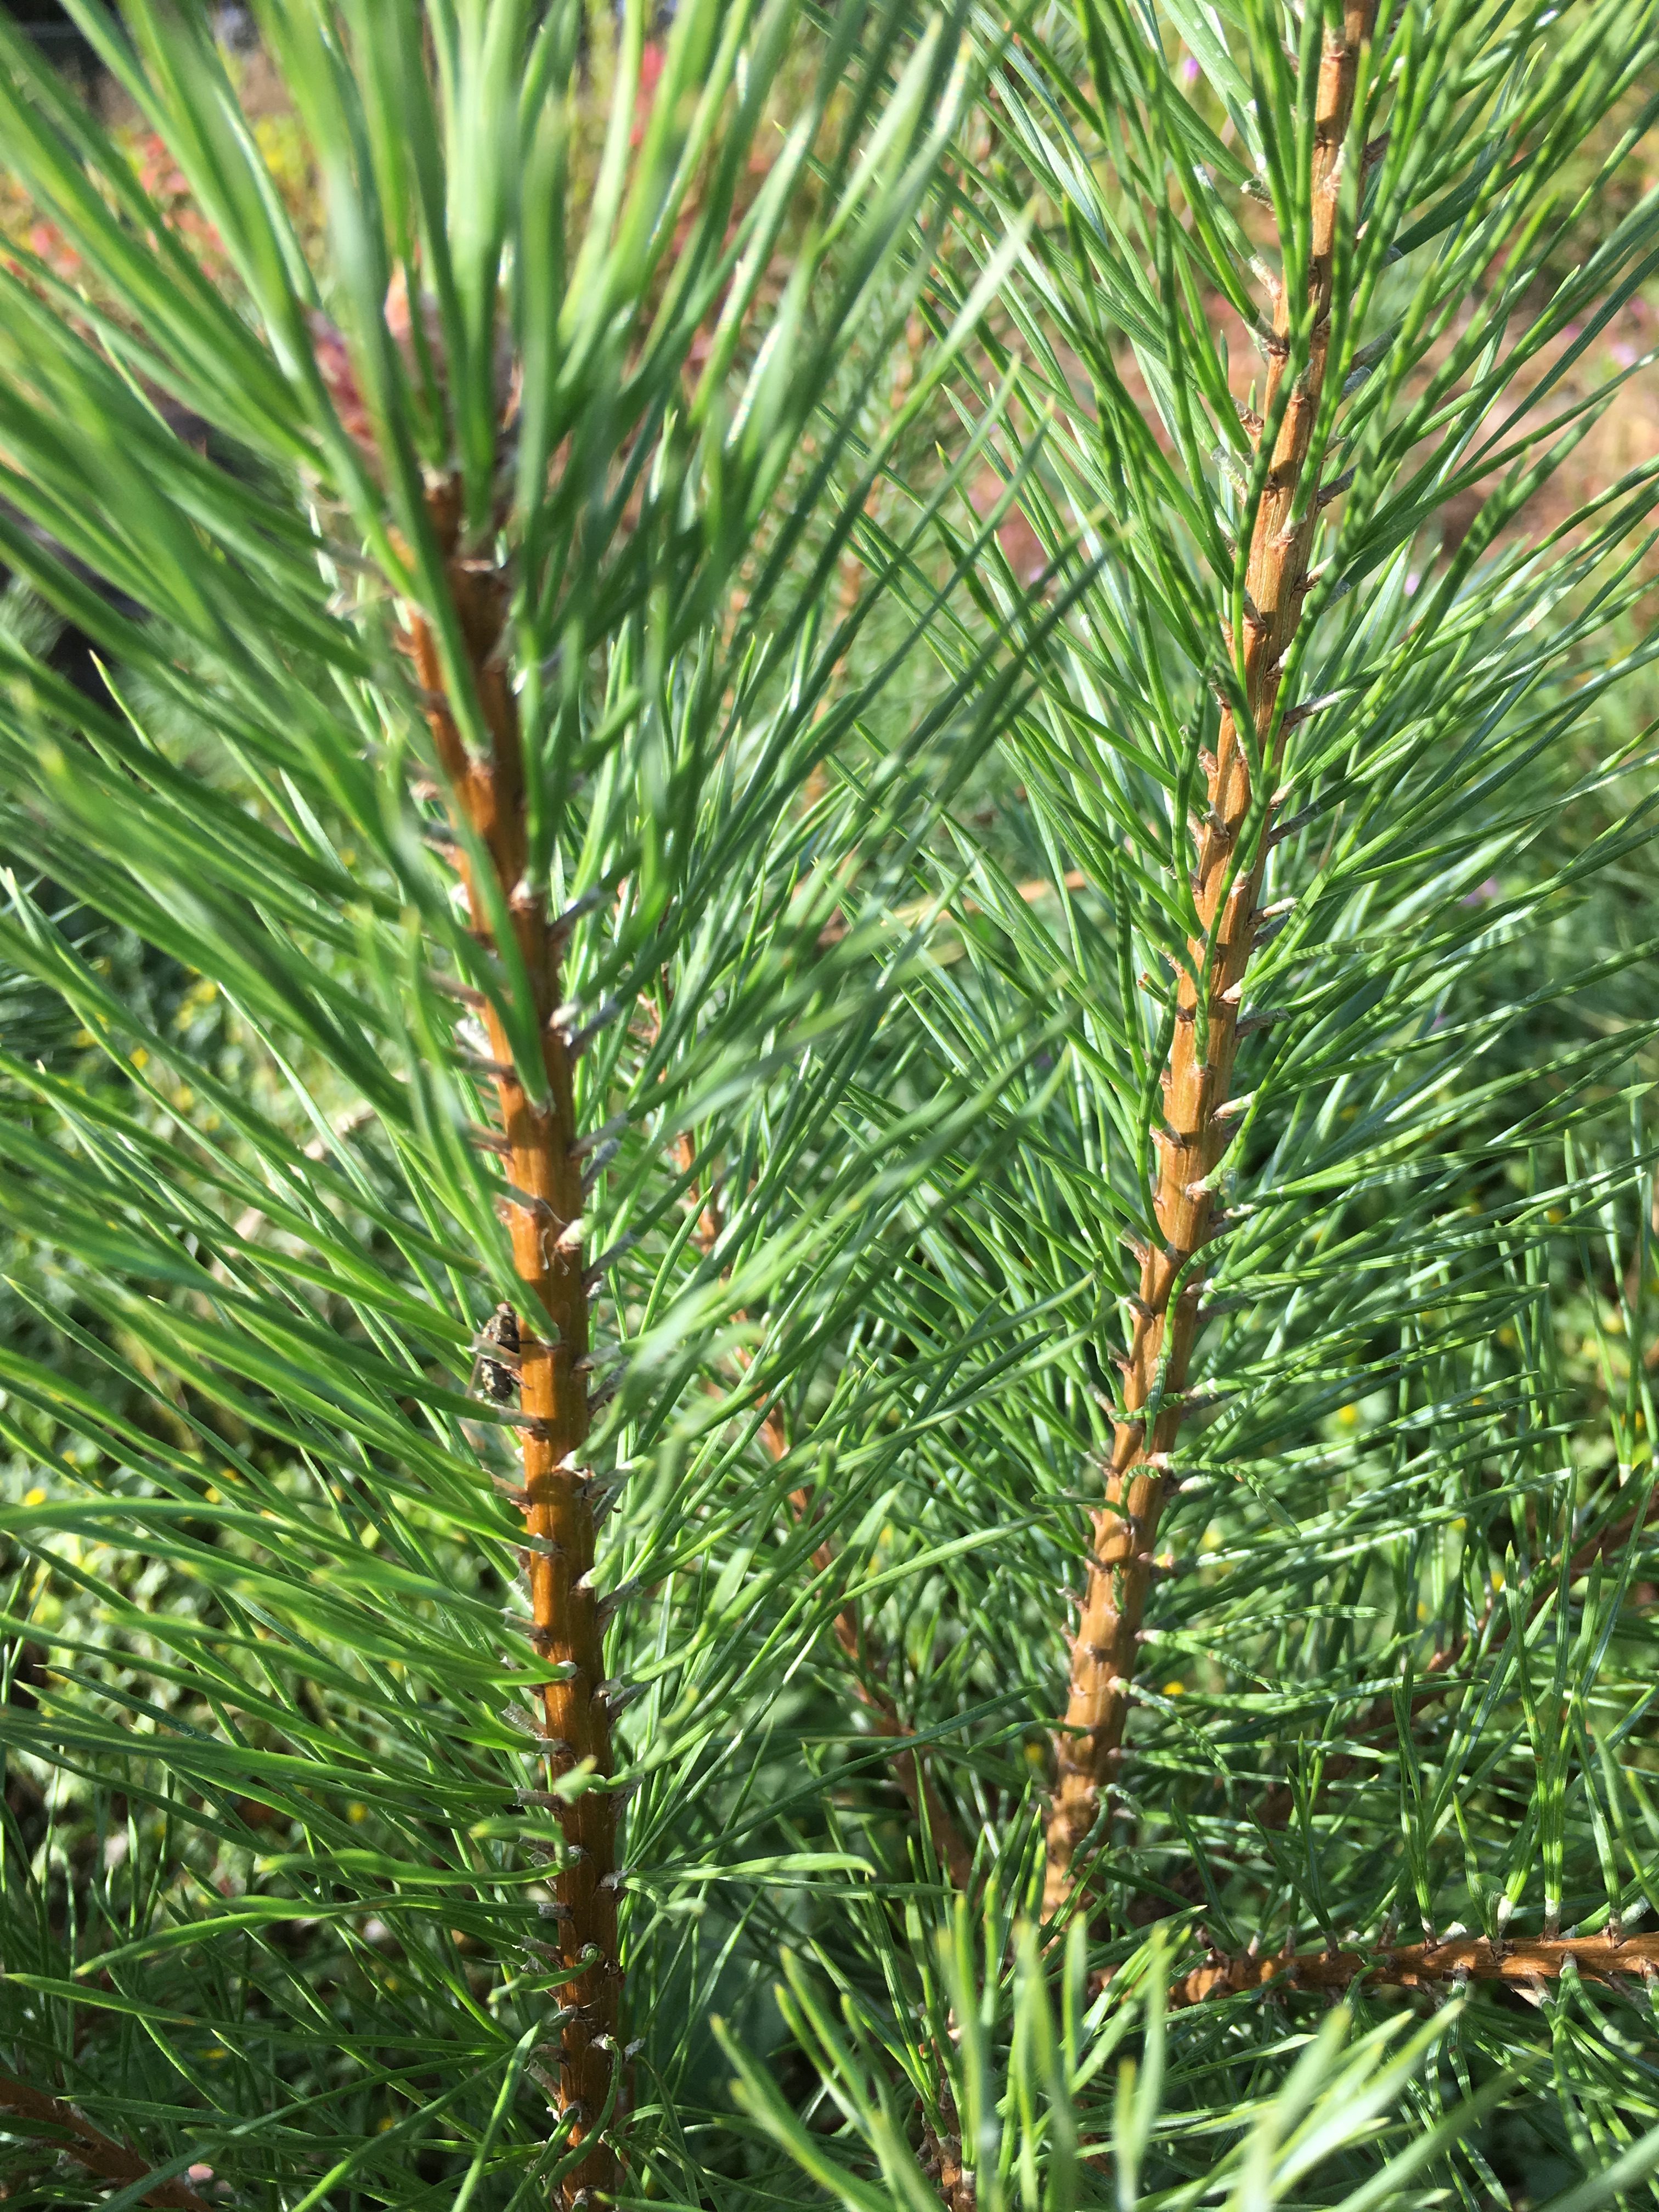 1 Pinus sylvestris Scots Pine Hardy Tree Easy to Grow Your Own Native Garden Trees Ideal As Specimen Trees Supplied As 1x Rootrainer Plug Plant by Thompson and Morgan 